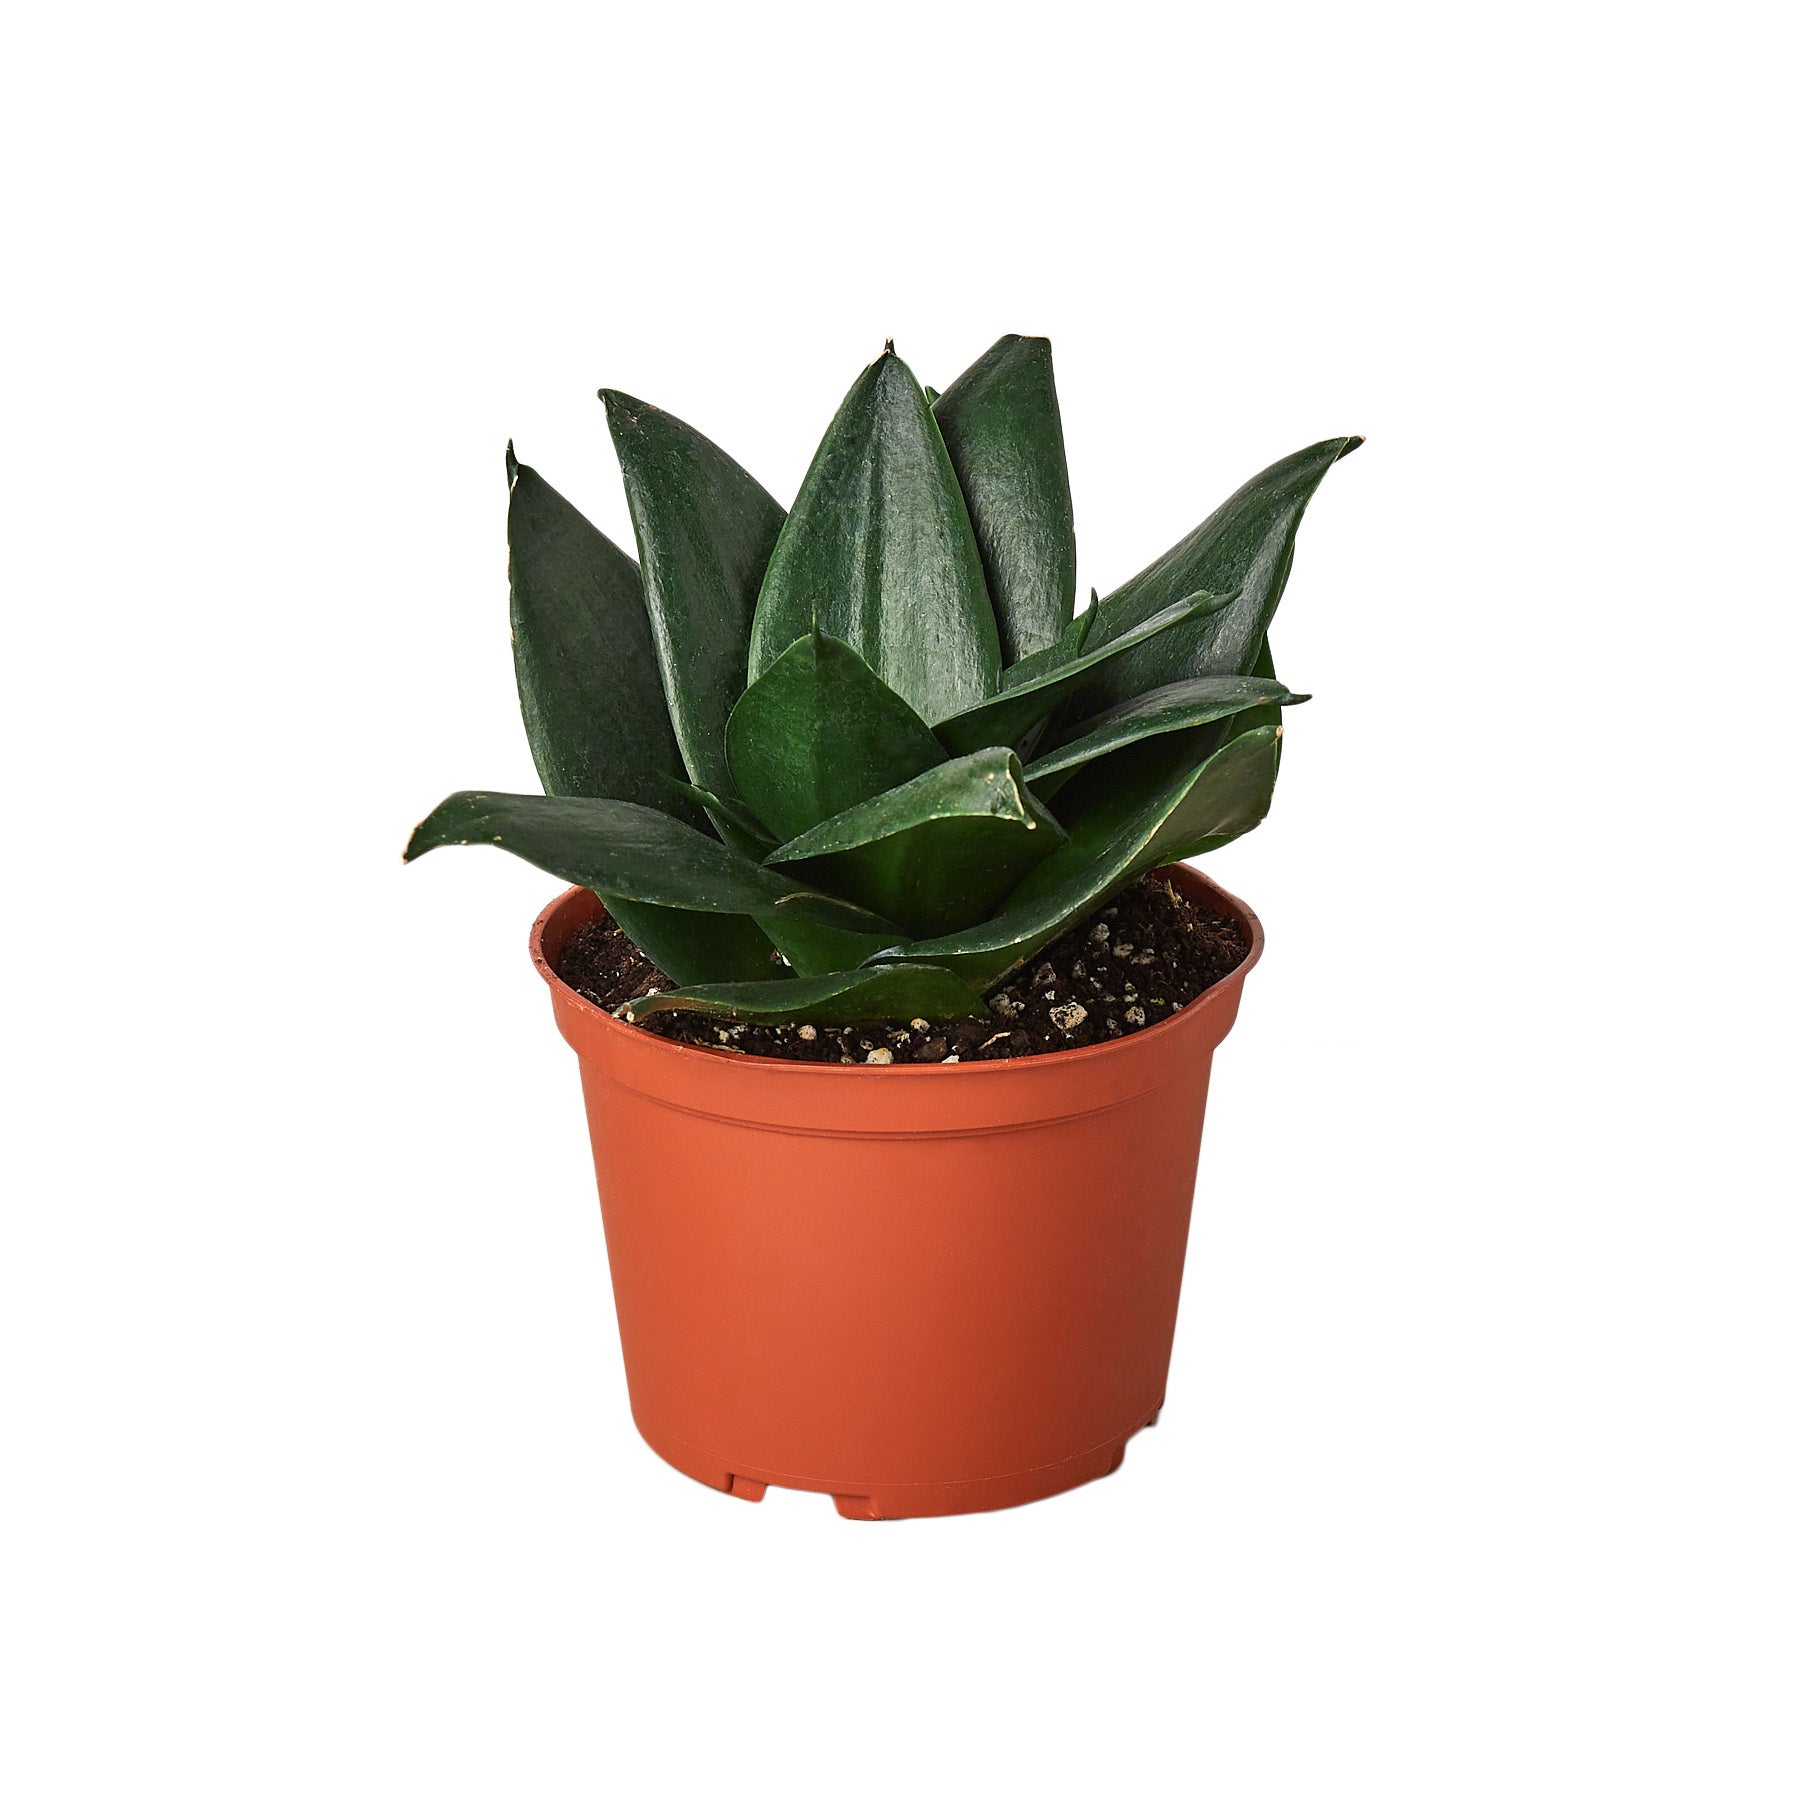 A red-potted plant on a white background in a nearby nursery.